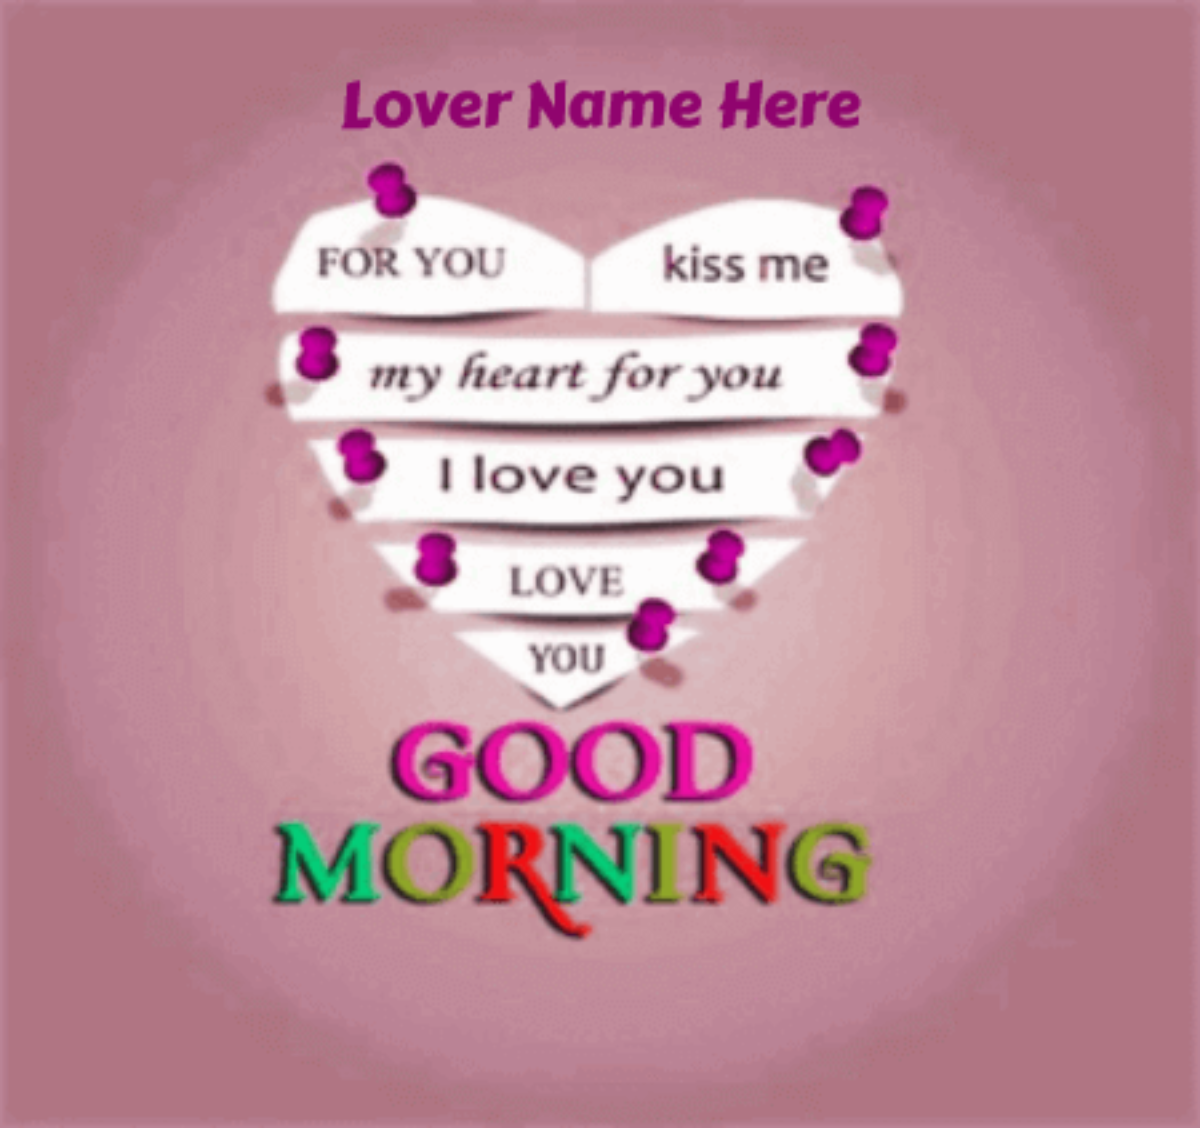 Good Morning Wish for Boyfriend- Good Morning Wishes With Name